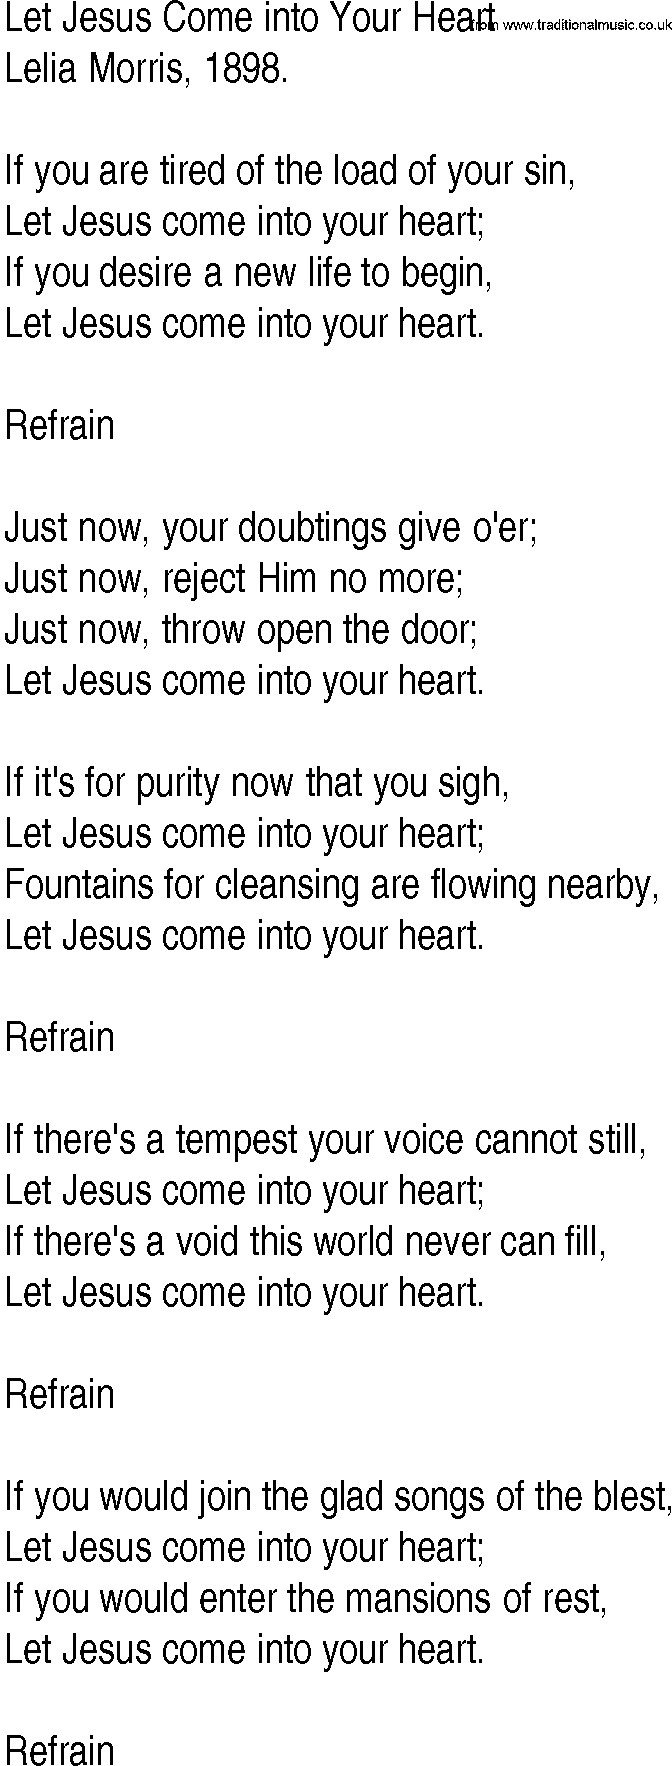 Hymn and Gospel Song: Let Jesus Come into Your Heart by Lelia Morris lyrics